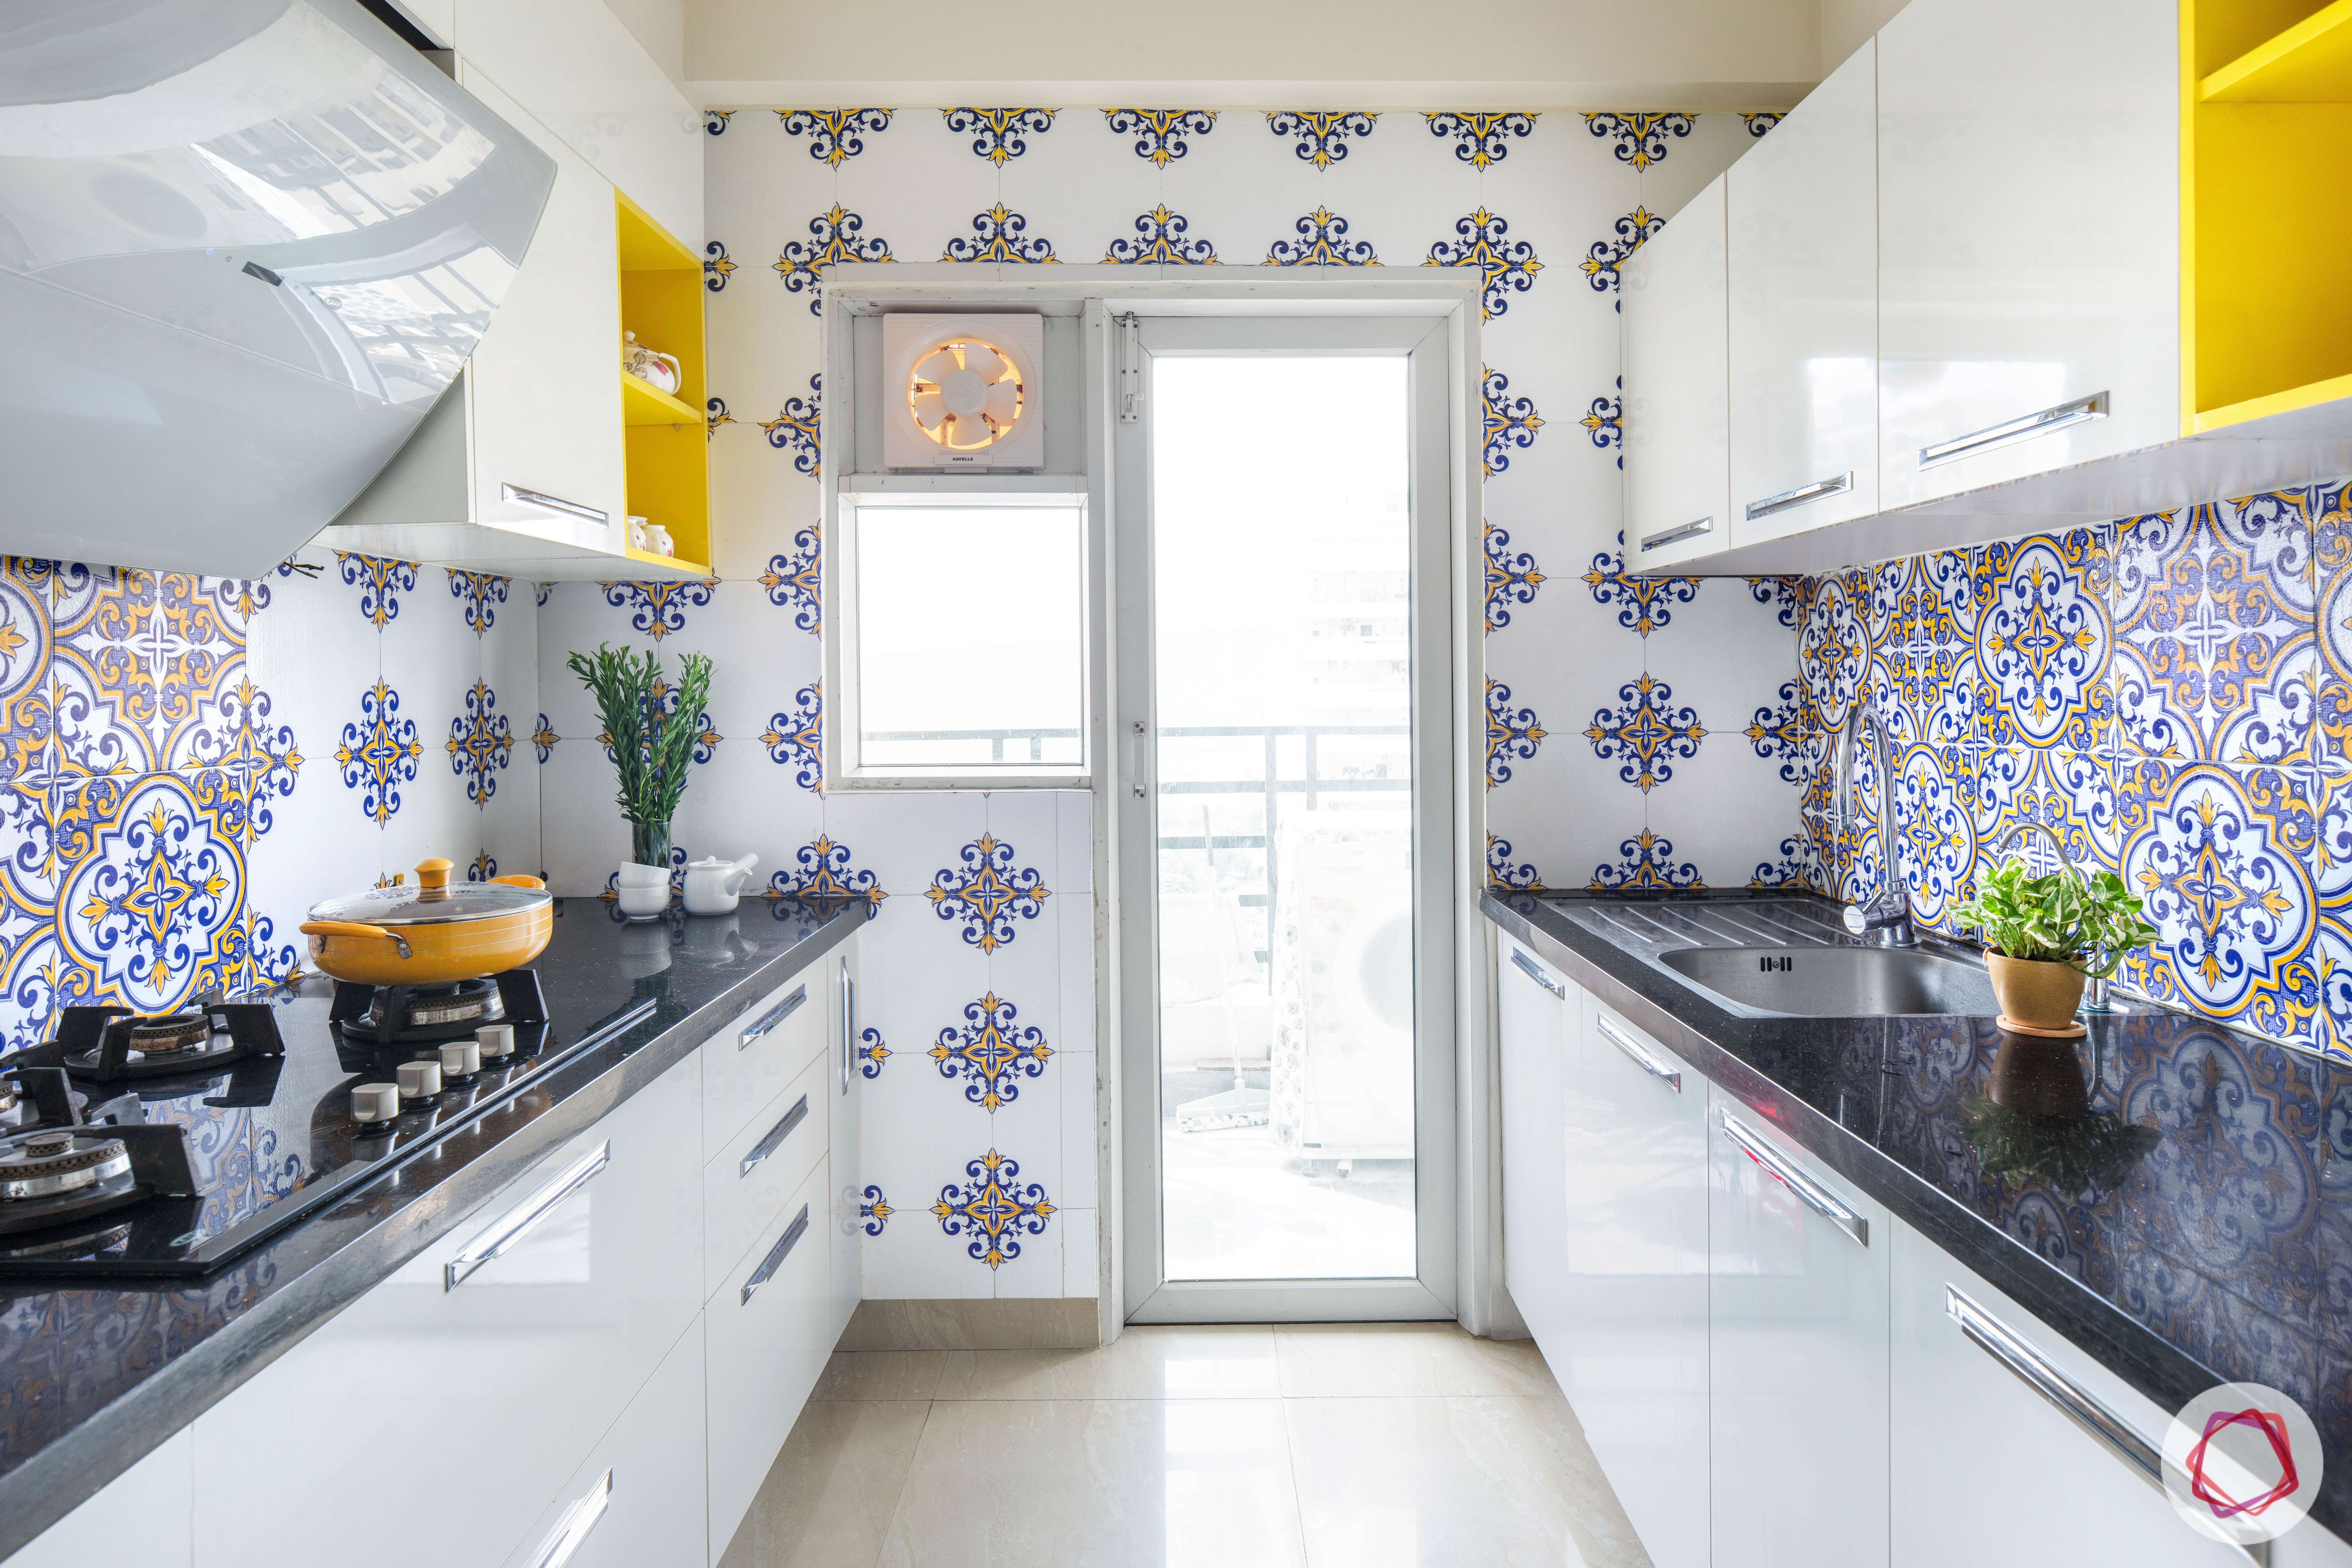 25 Splendid Wall Tiles Design That Can Give a New Look to Your Kitchen